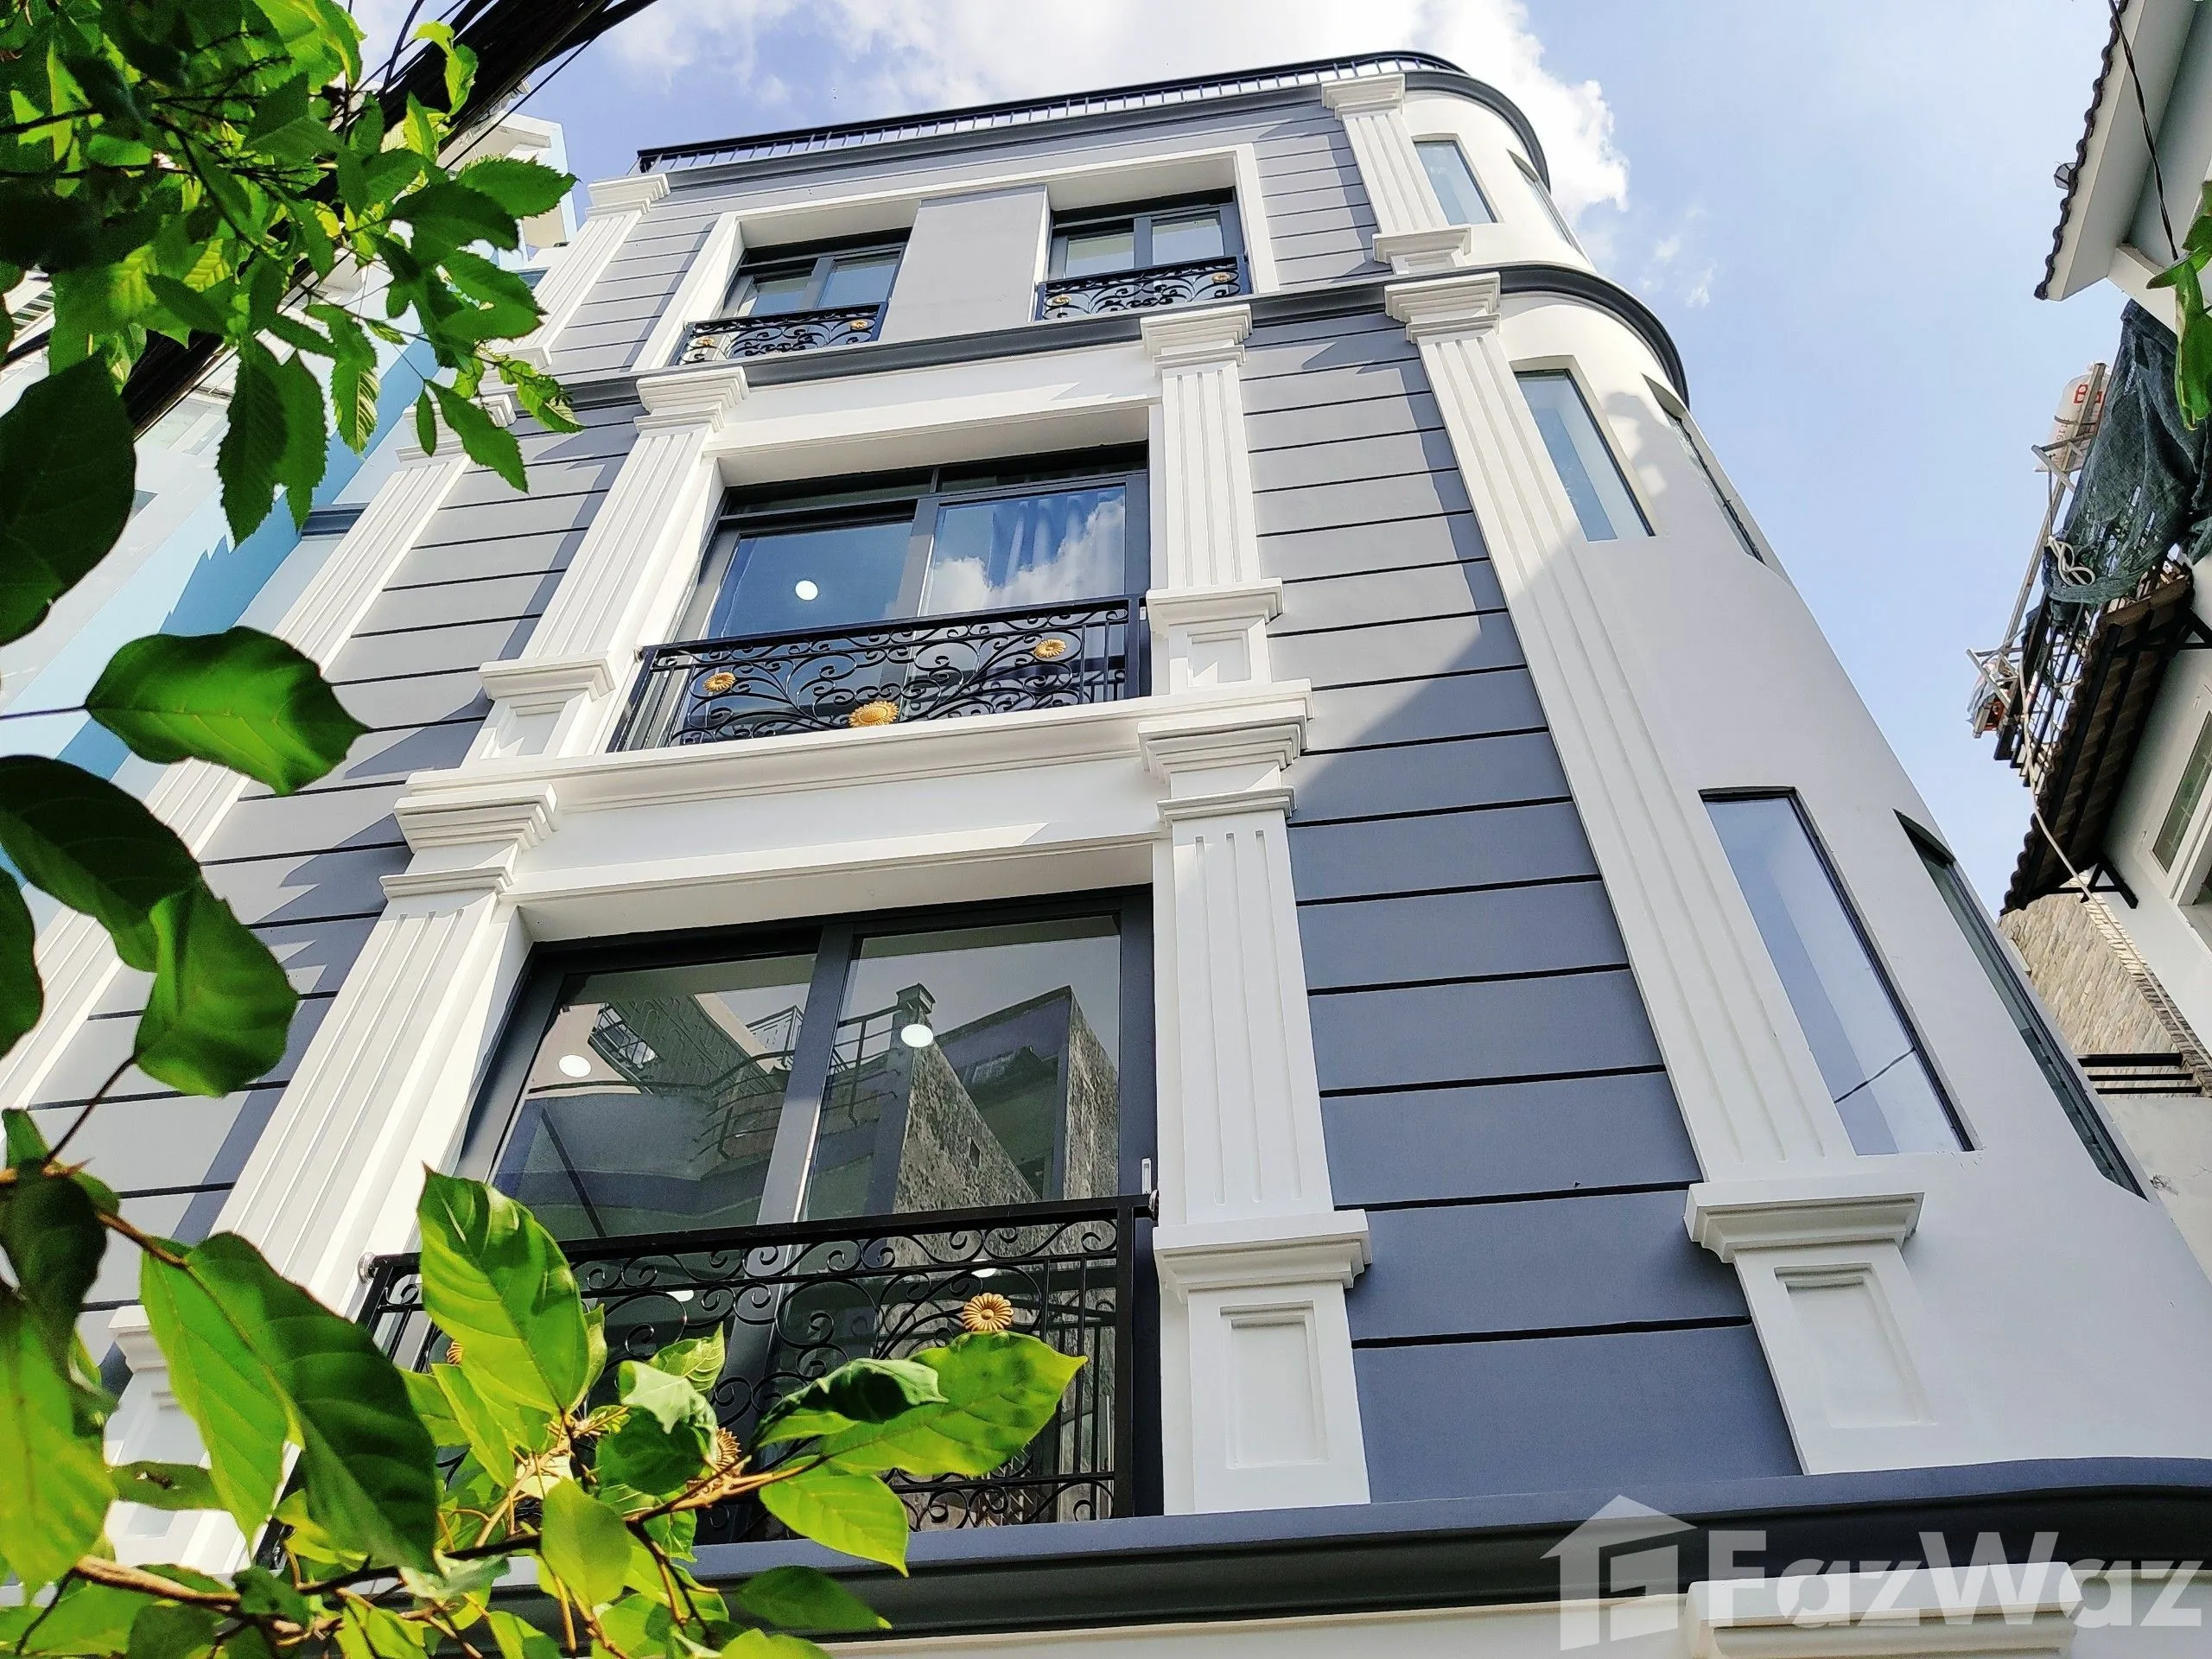 4 Bedroom Townhouse for Rent in Ward 11, Ho Chi Minh City for 1 ₫/mo ...